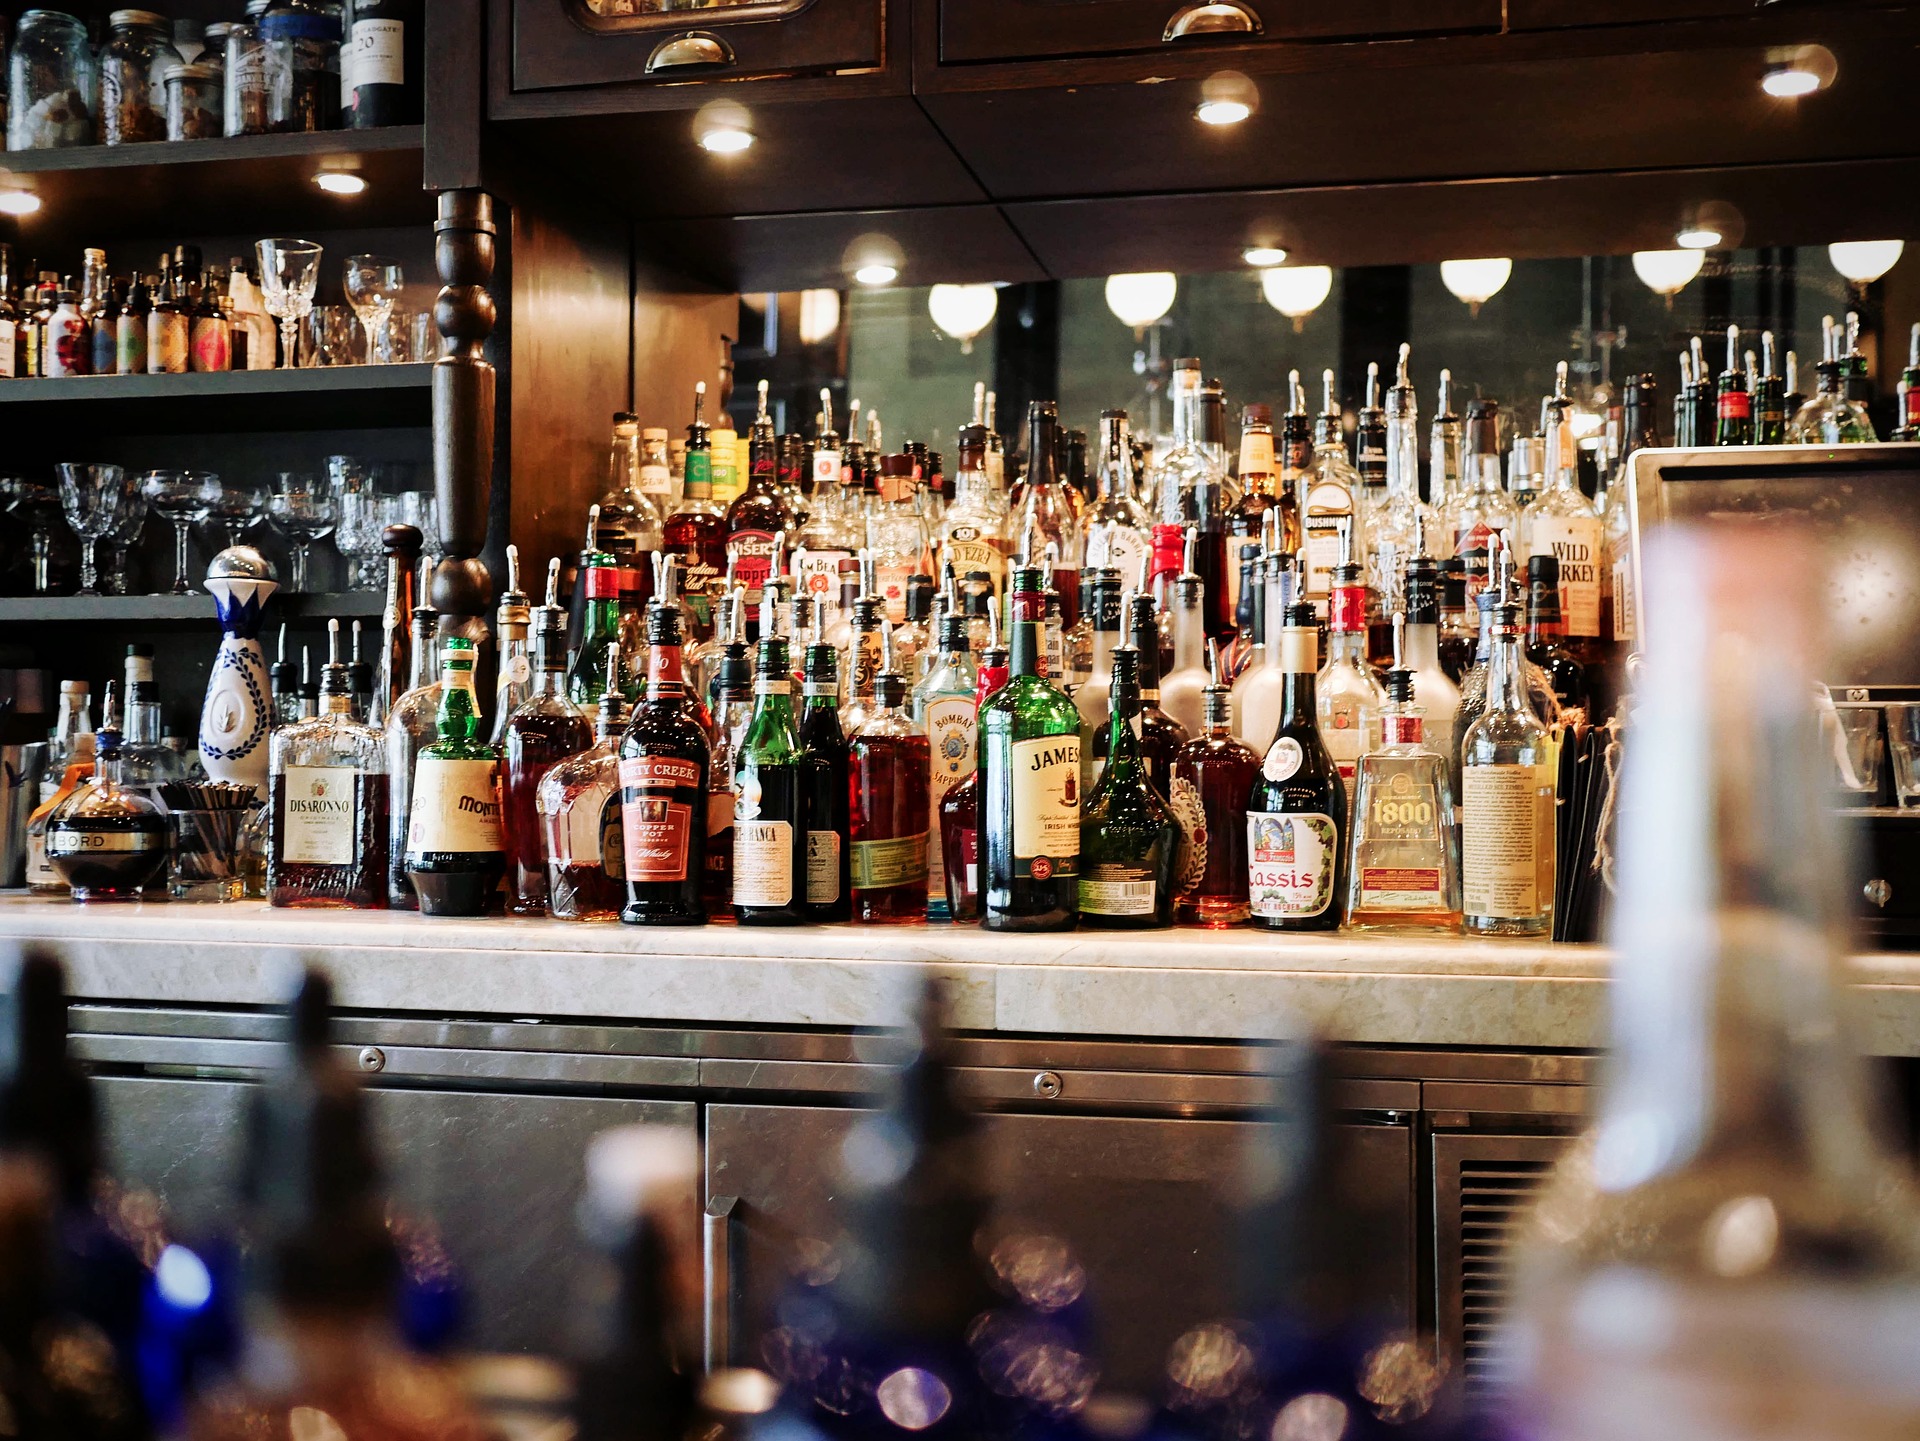 PHOTO: Bartenders overserving is a growing problem in the greater Houston area. Photo Courtesy of Pixabay.